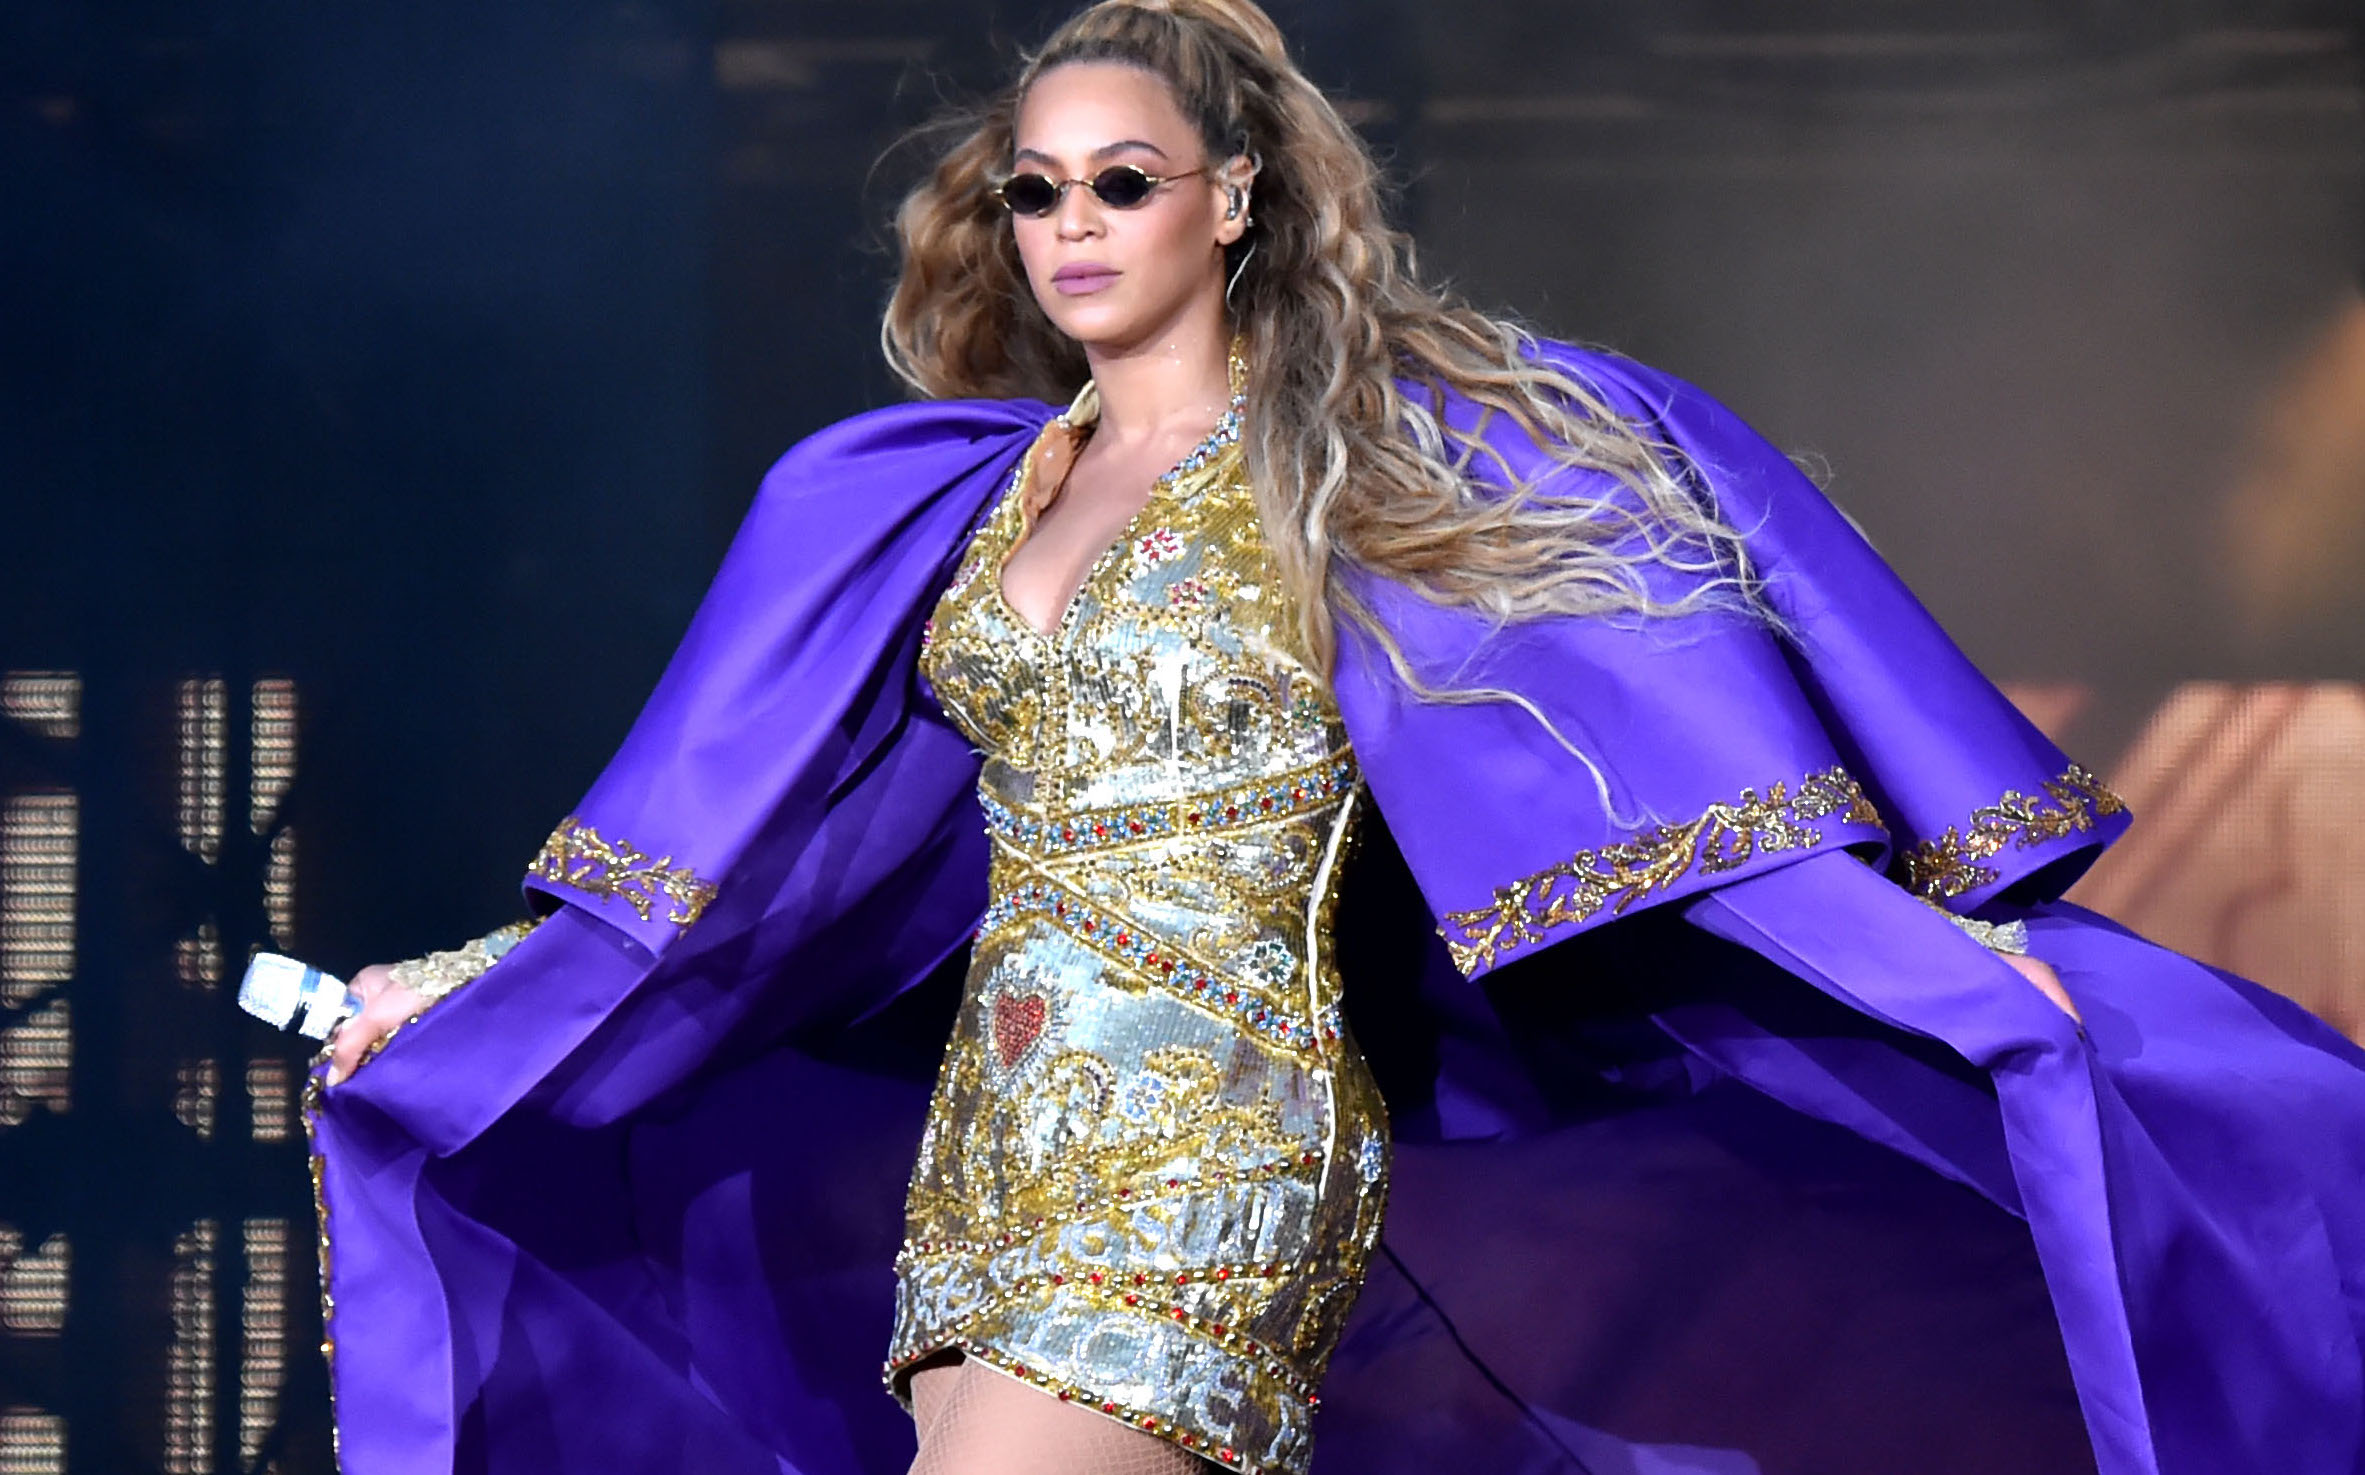 beyonce avoids falling down stairs video